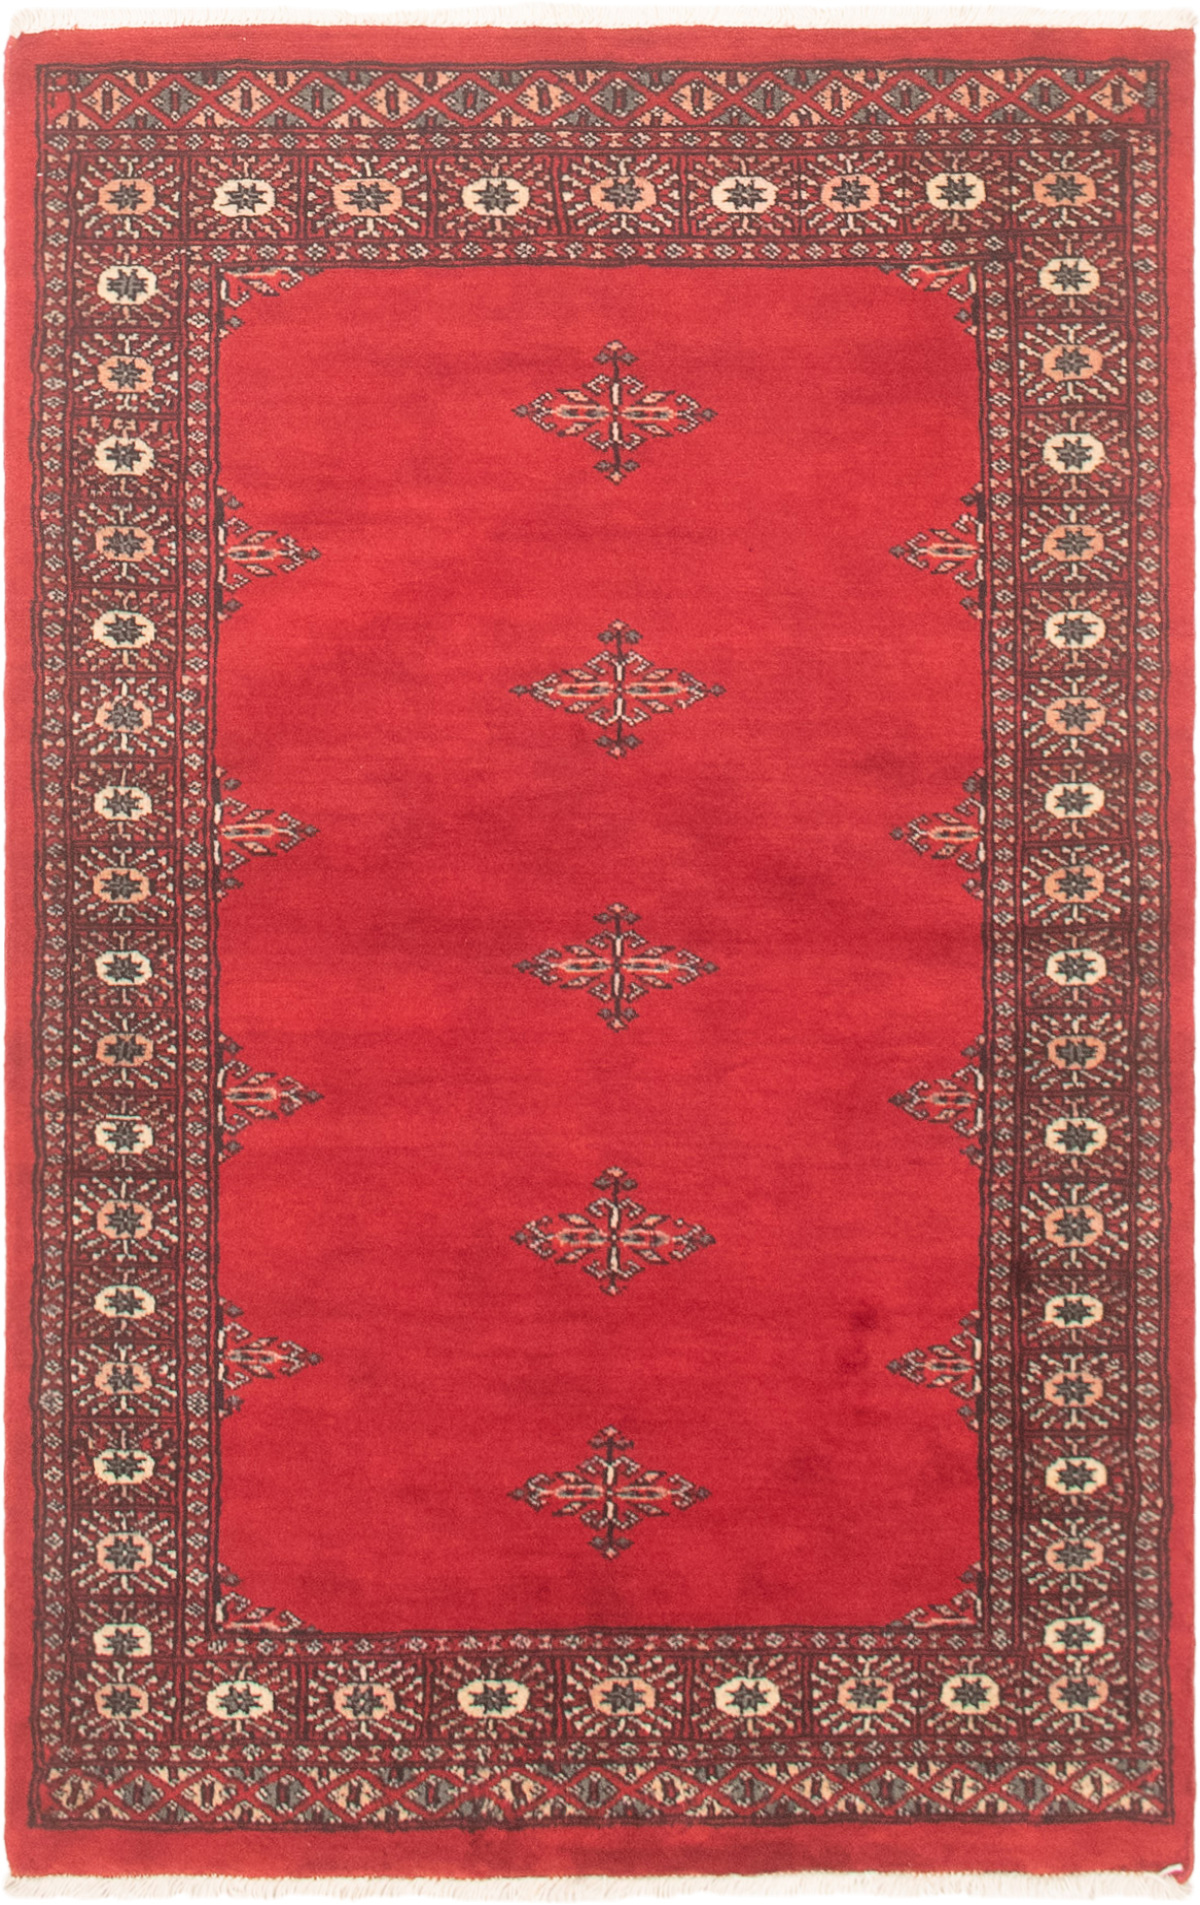 Hand-knotted Finest Peshawar Bokhara Red Wool Rug 3'1" x 4'11"  Size: 3'1" x 4'11"  